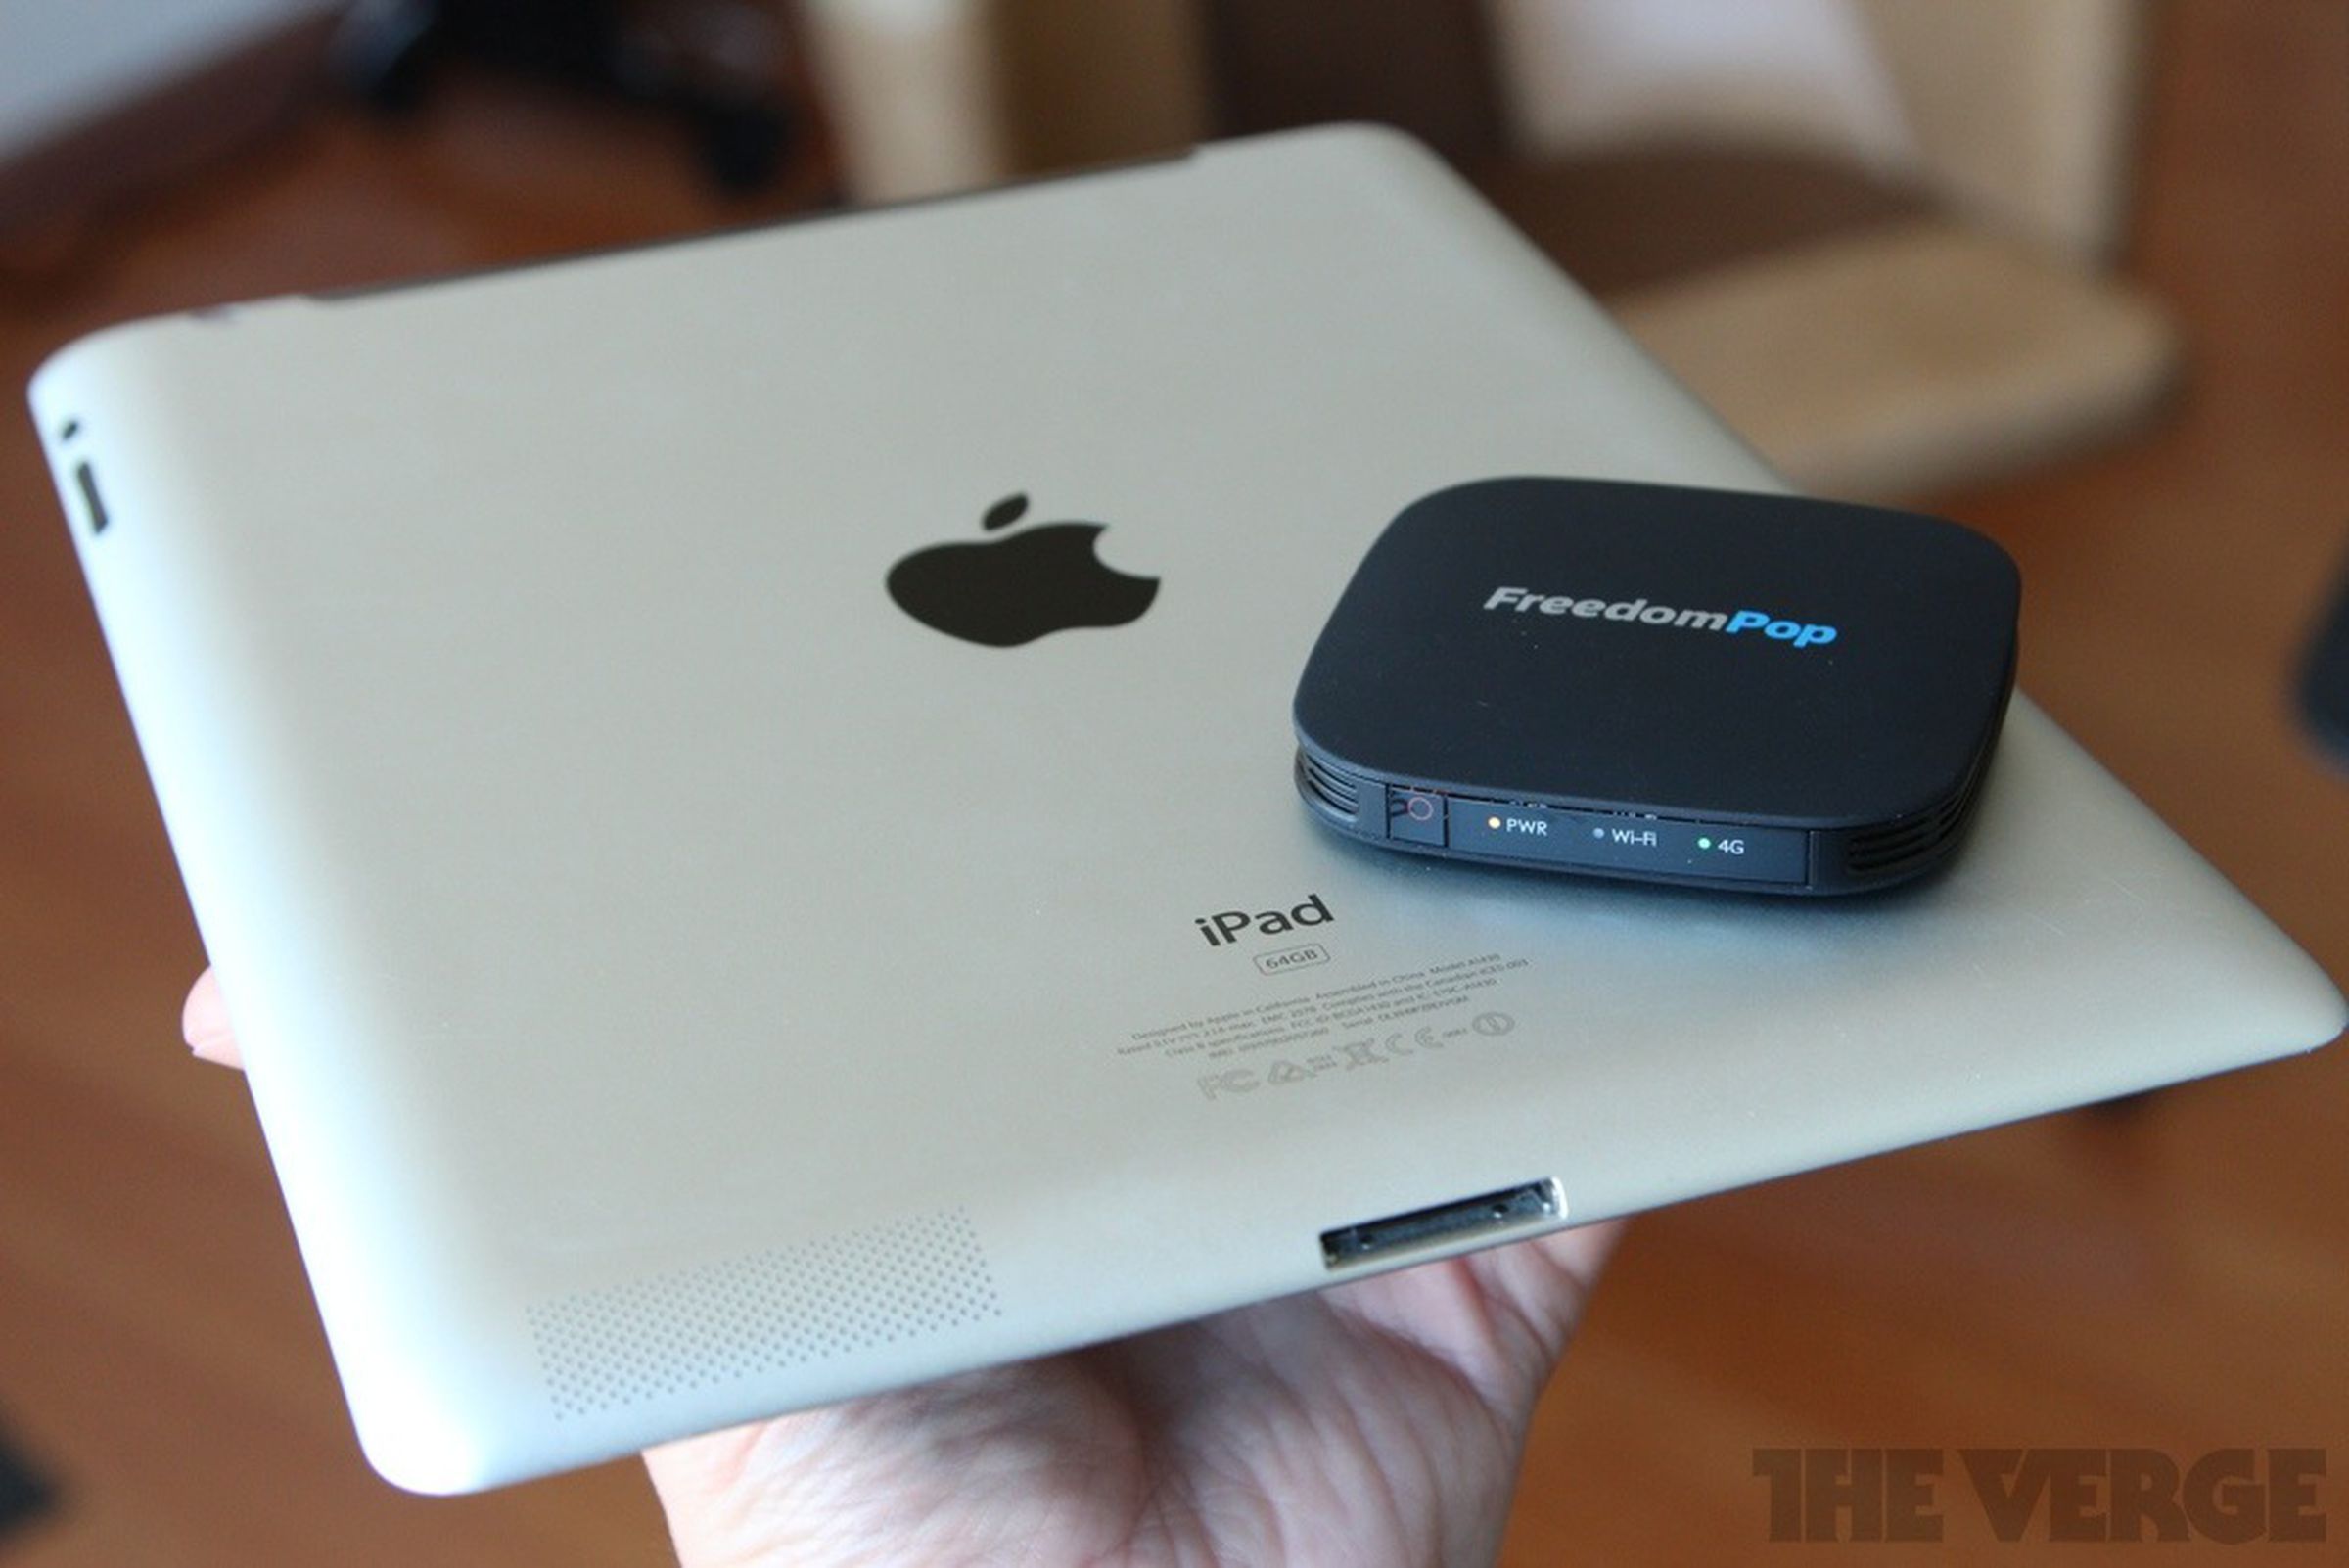 FreedomPop WiMAX dongle and hotspot hands-on pictures